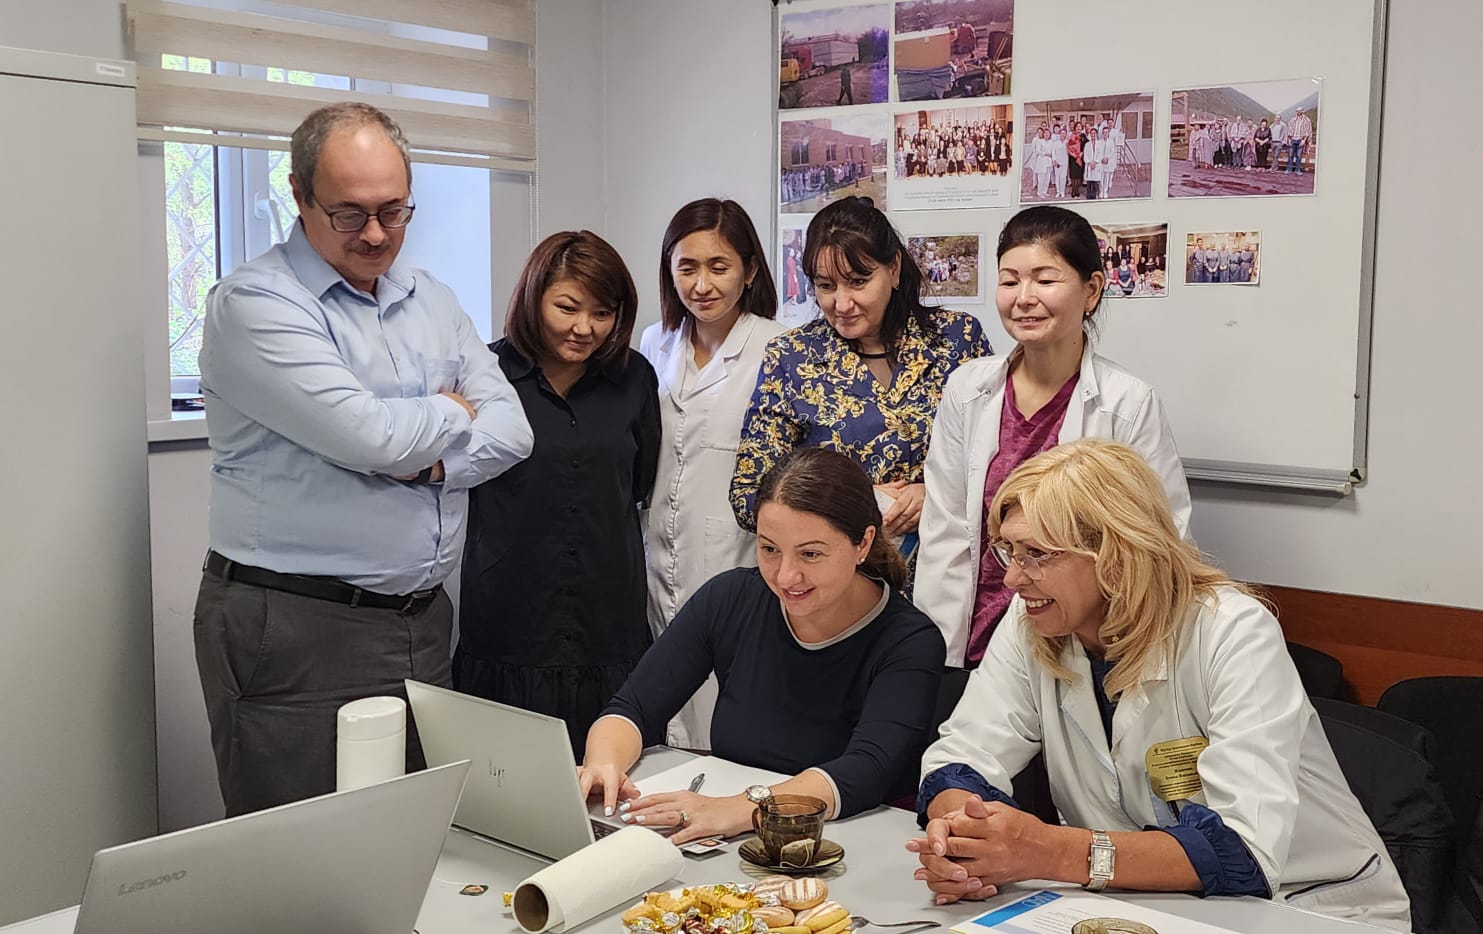 U.S. National Institutes of Health’s (NIH) National Institute of Allergy and Infectious Diseases (NIAID) visited ISTC partners in Kazakhstan and Kyrgyzstan